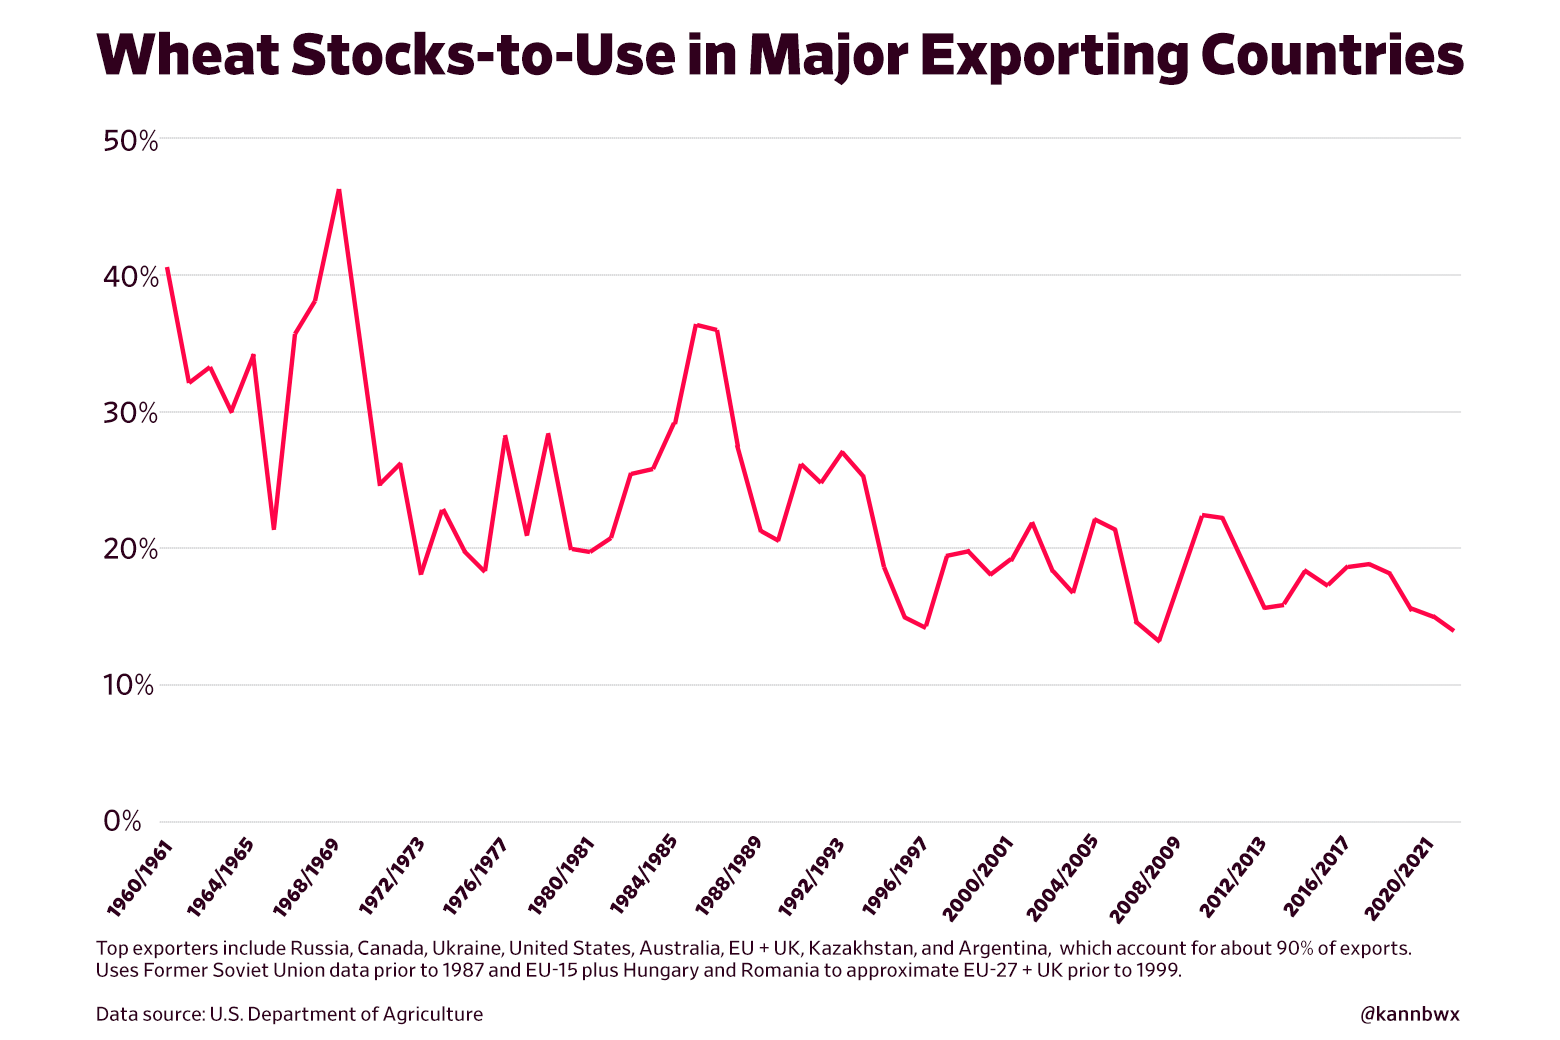 Chart of wheat stocks-to-use in major exporting countries since 1960